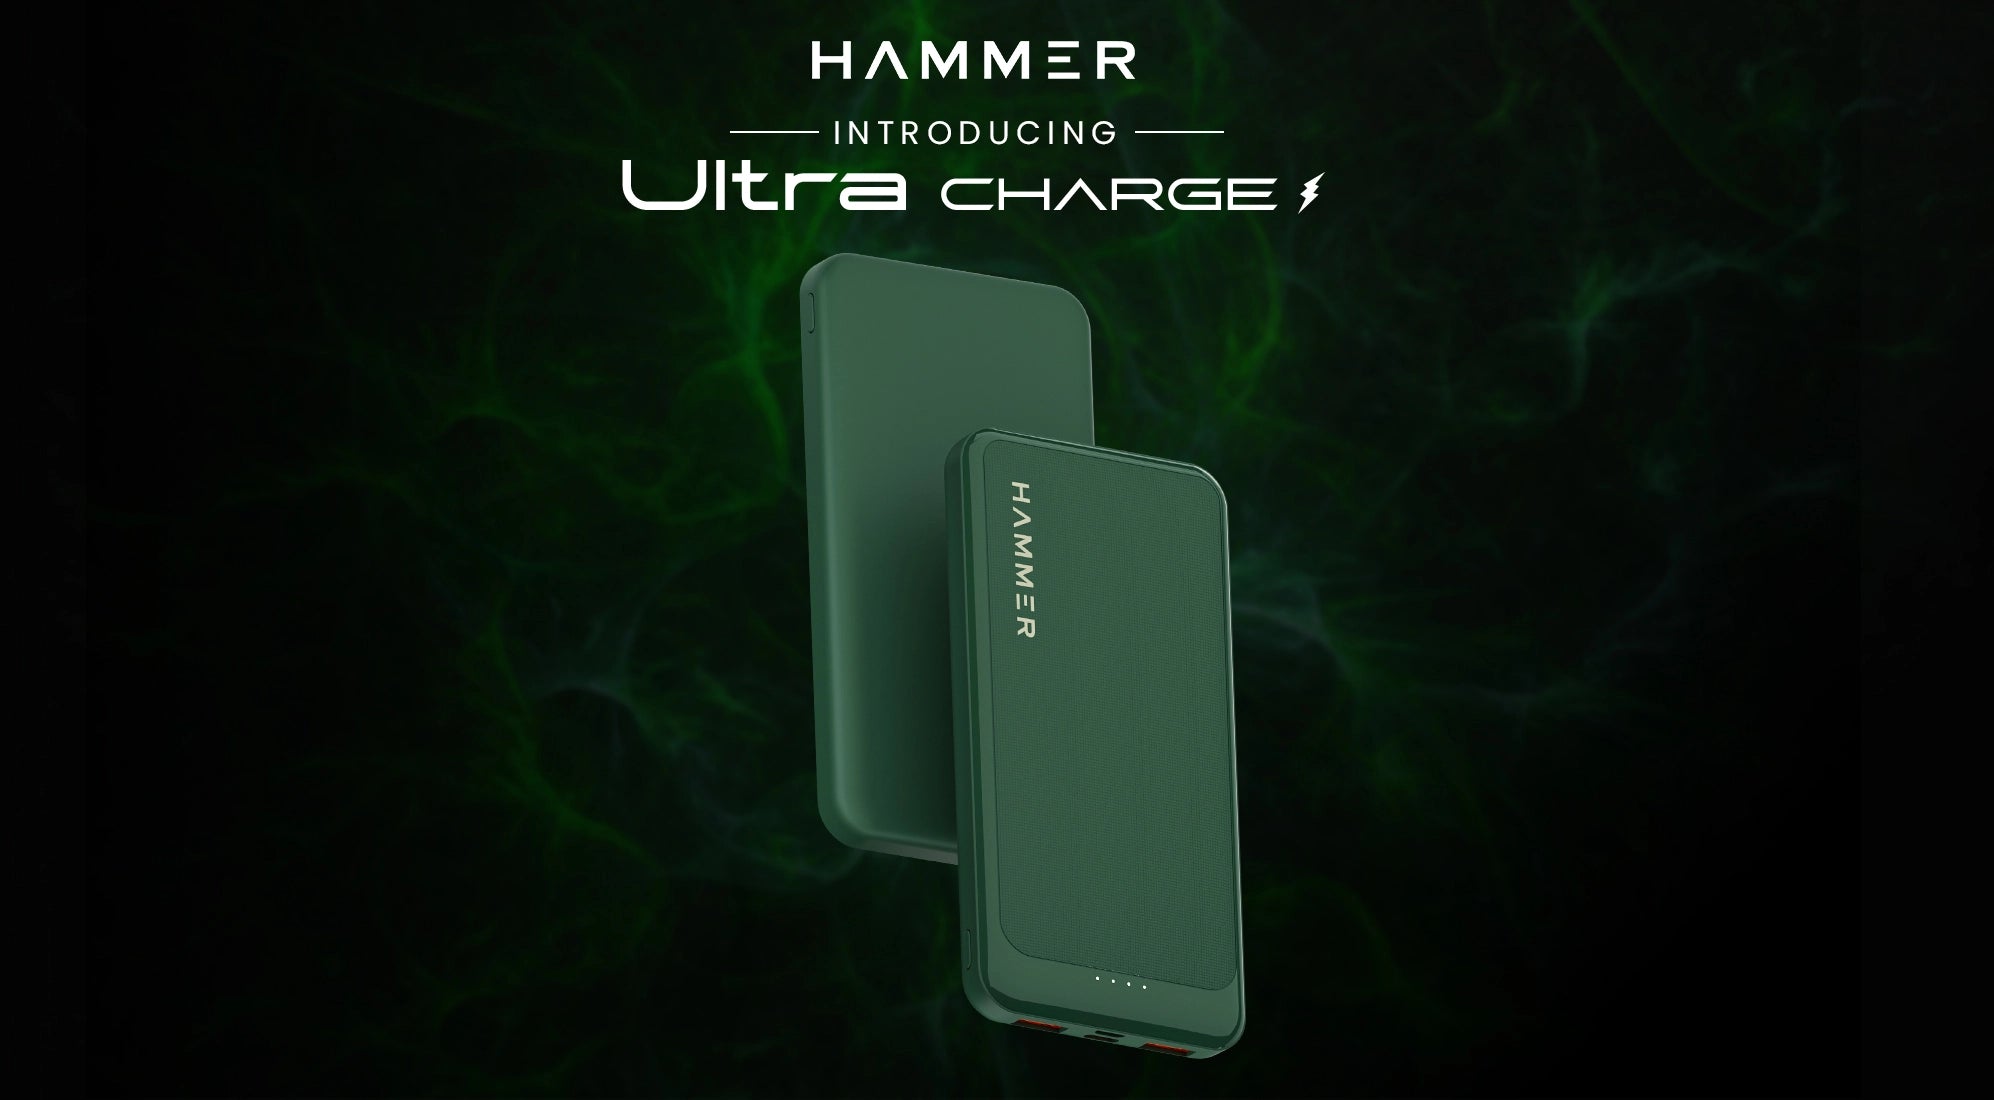 Hammer ultra charge